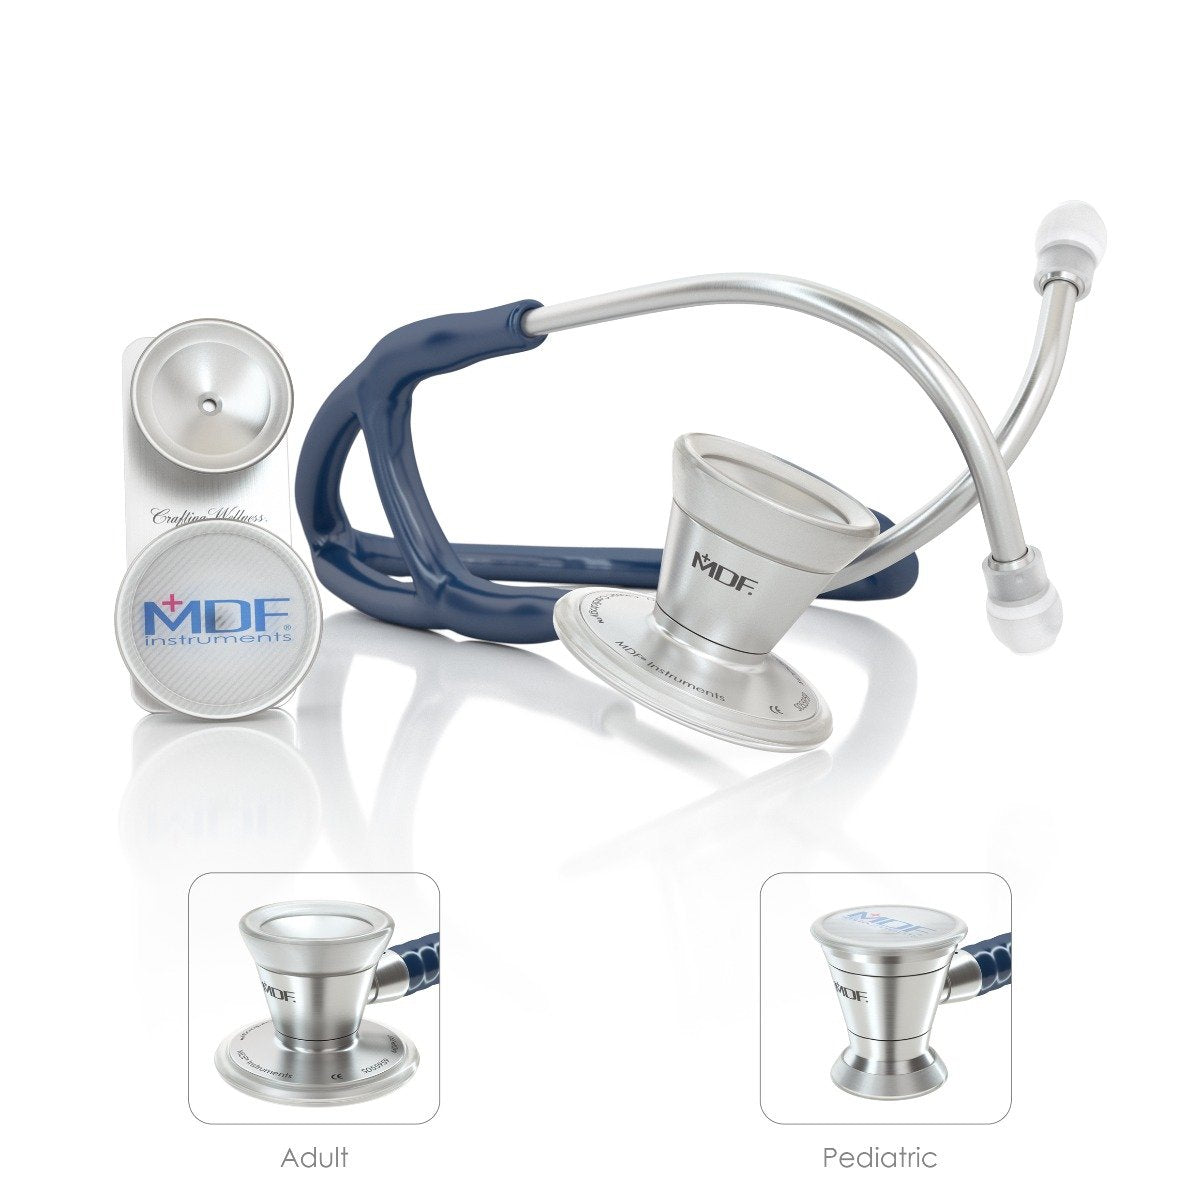 MDF® ProCardial® ER Premier® Cardiology Stainless Steel Dual Head Adult-Pediatric Stethoscope with Adult Cardiology Bell Convertible Attachment (MDF797DD) - Navy Blue